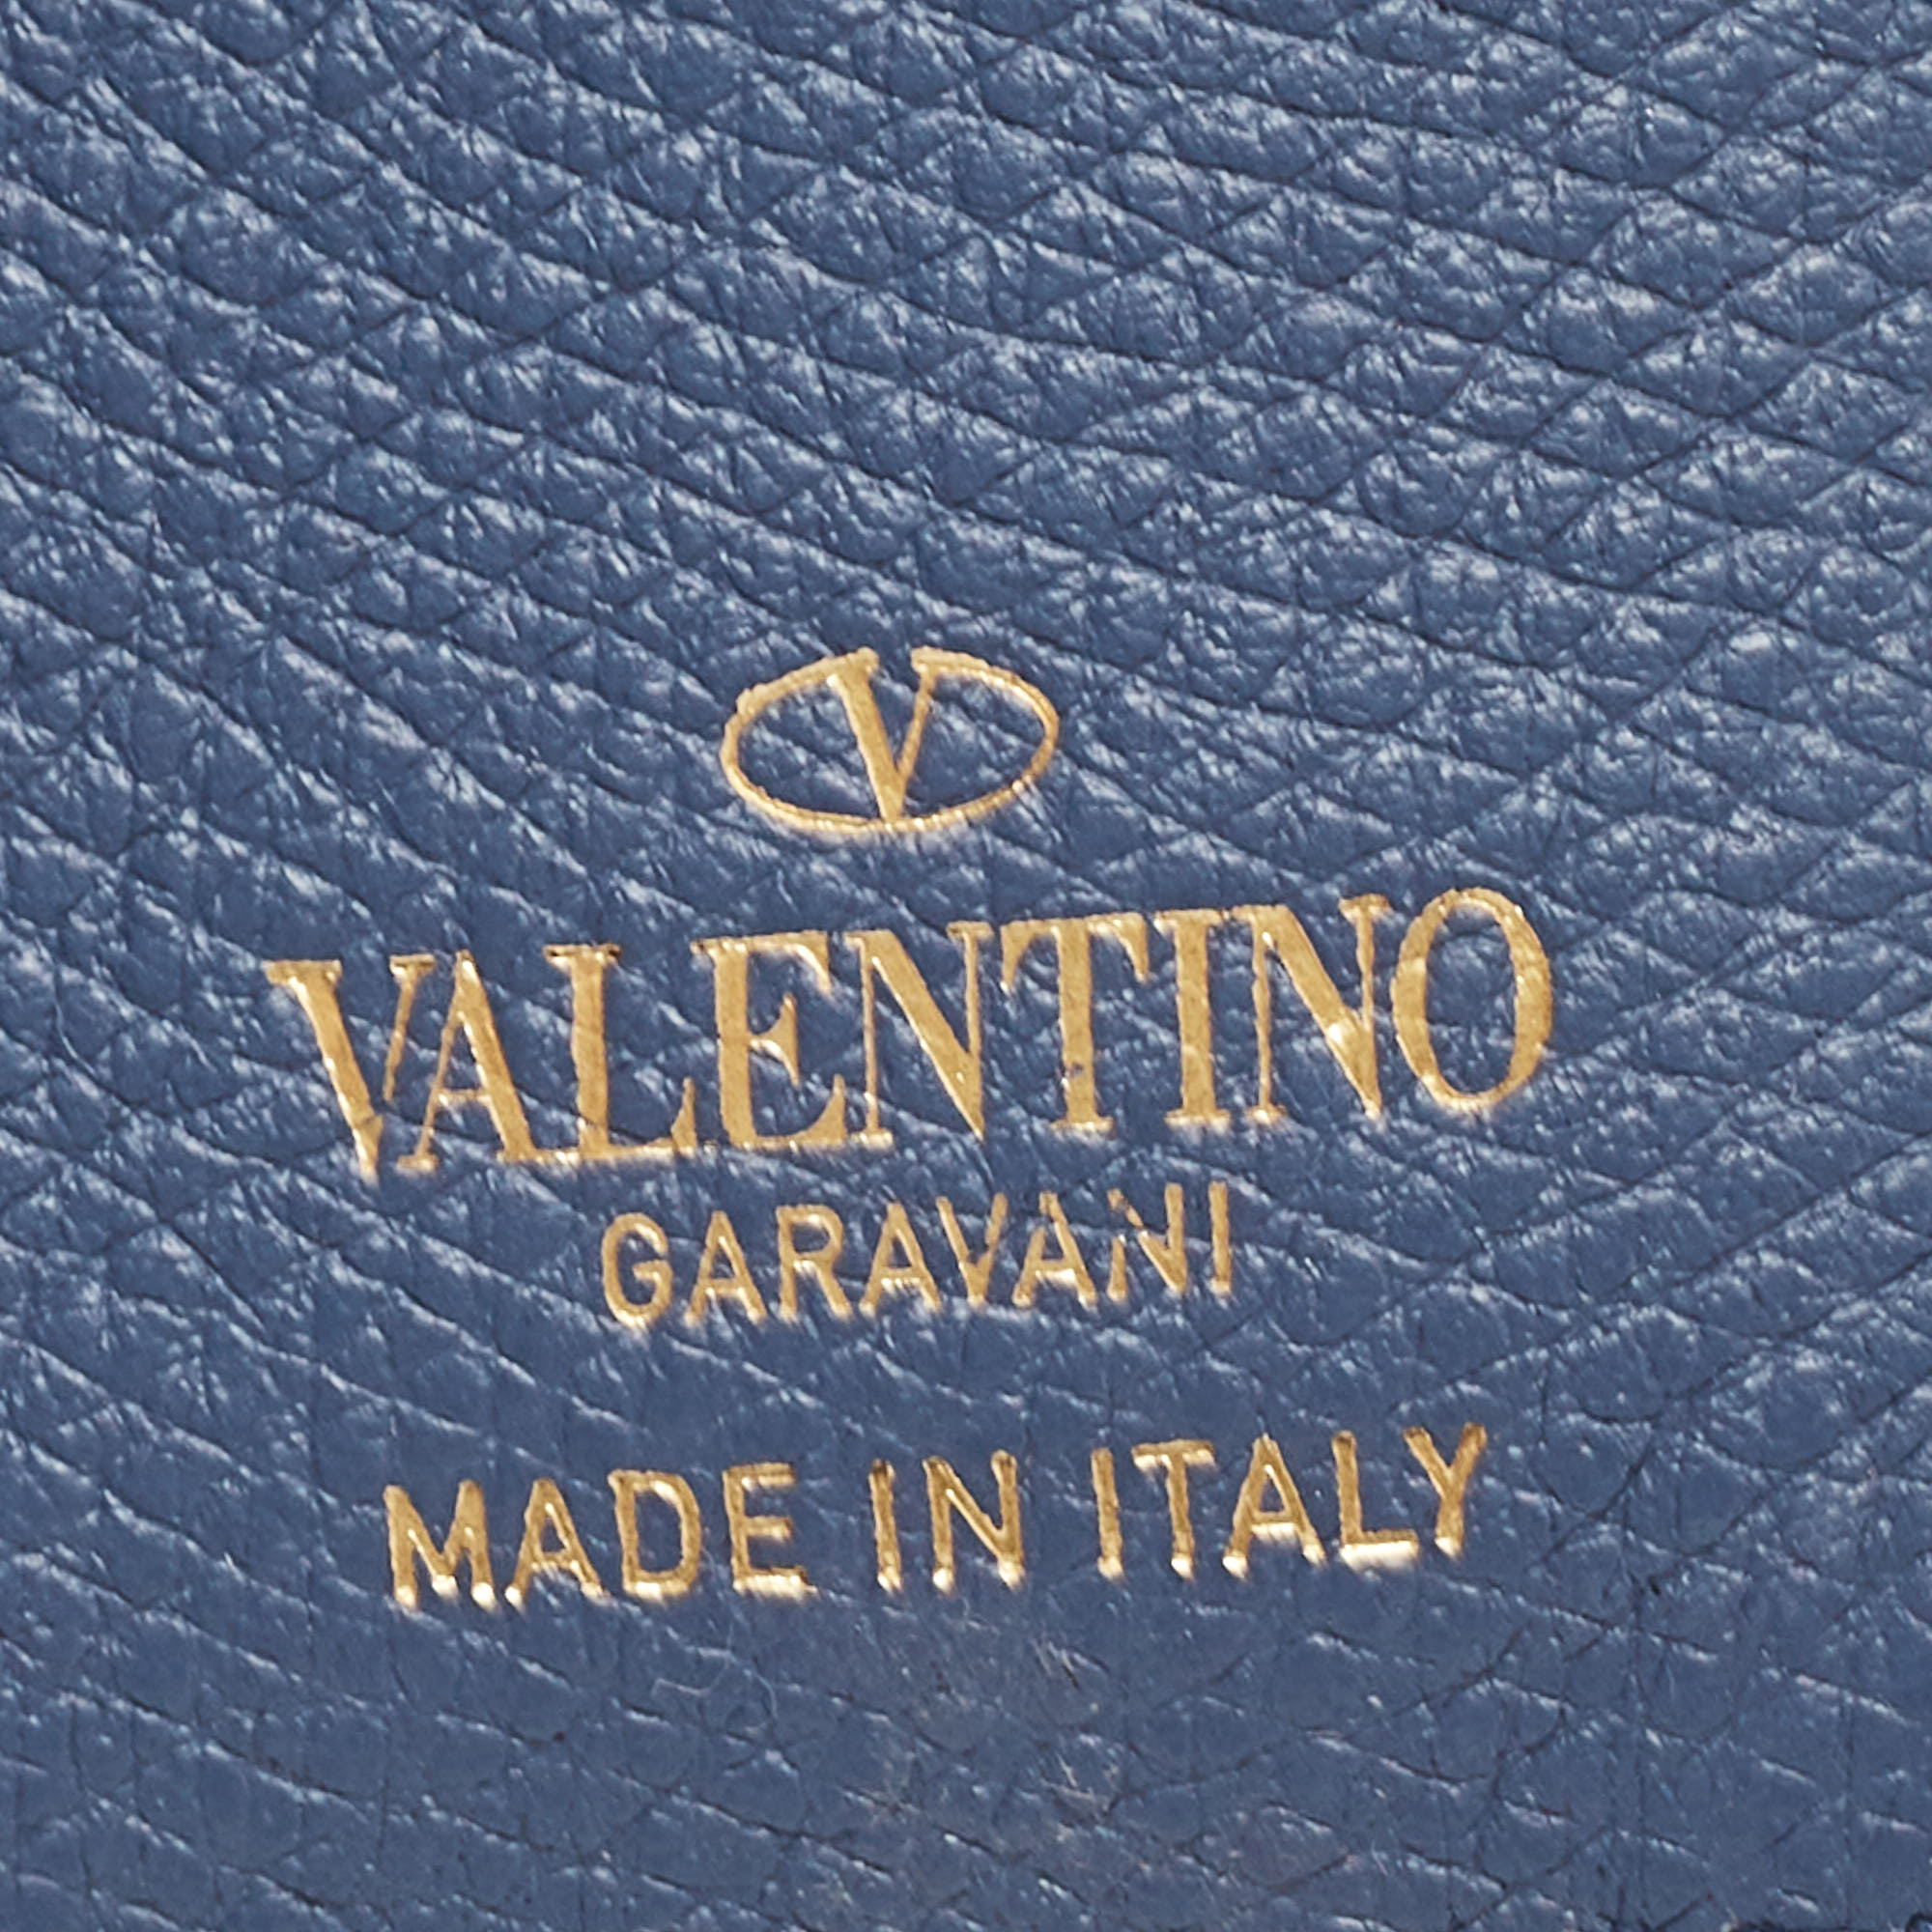 Valentino Blue Leather VLogo Compact Wallet